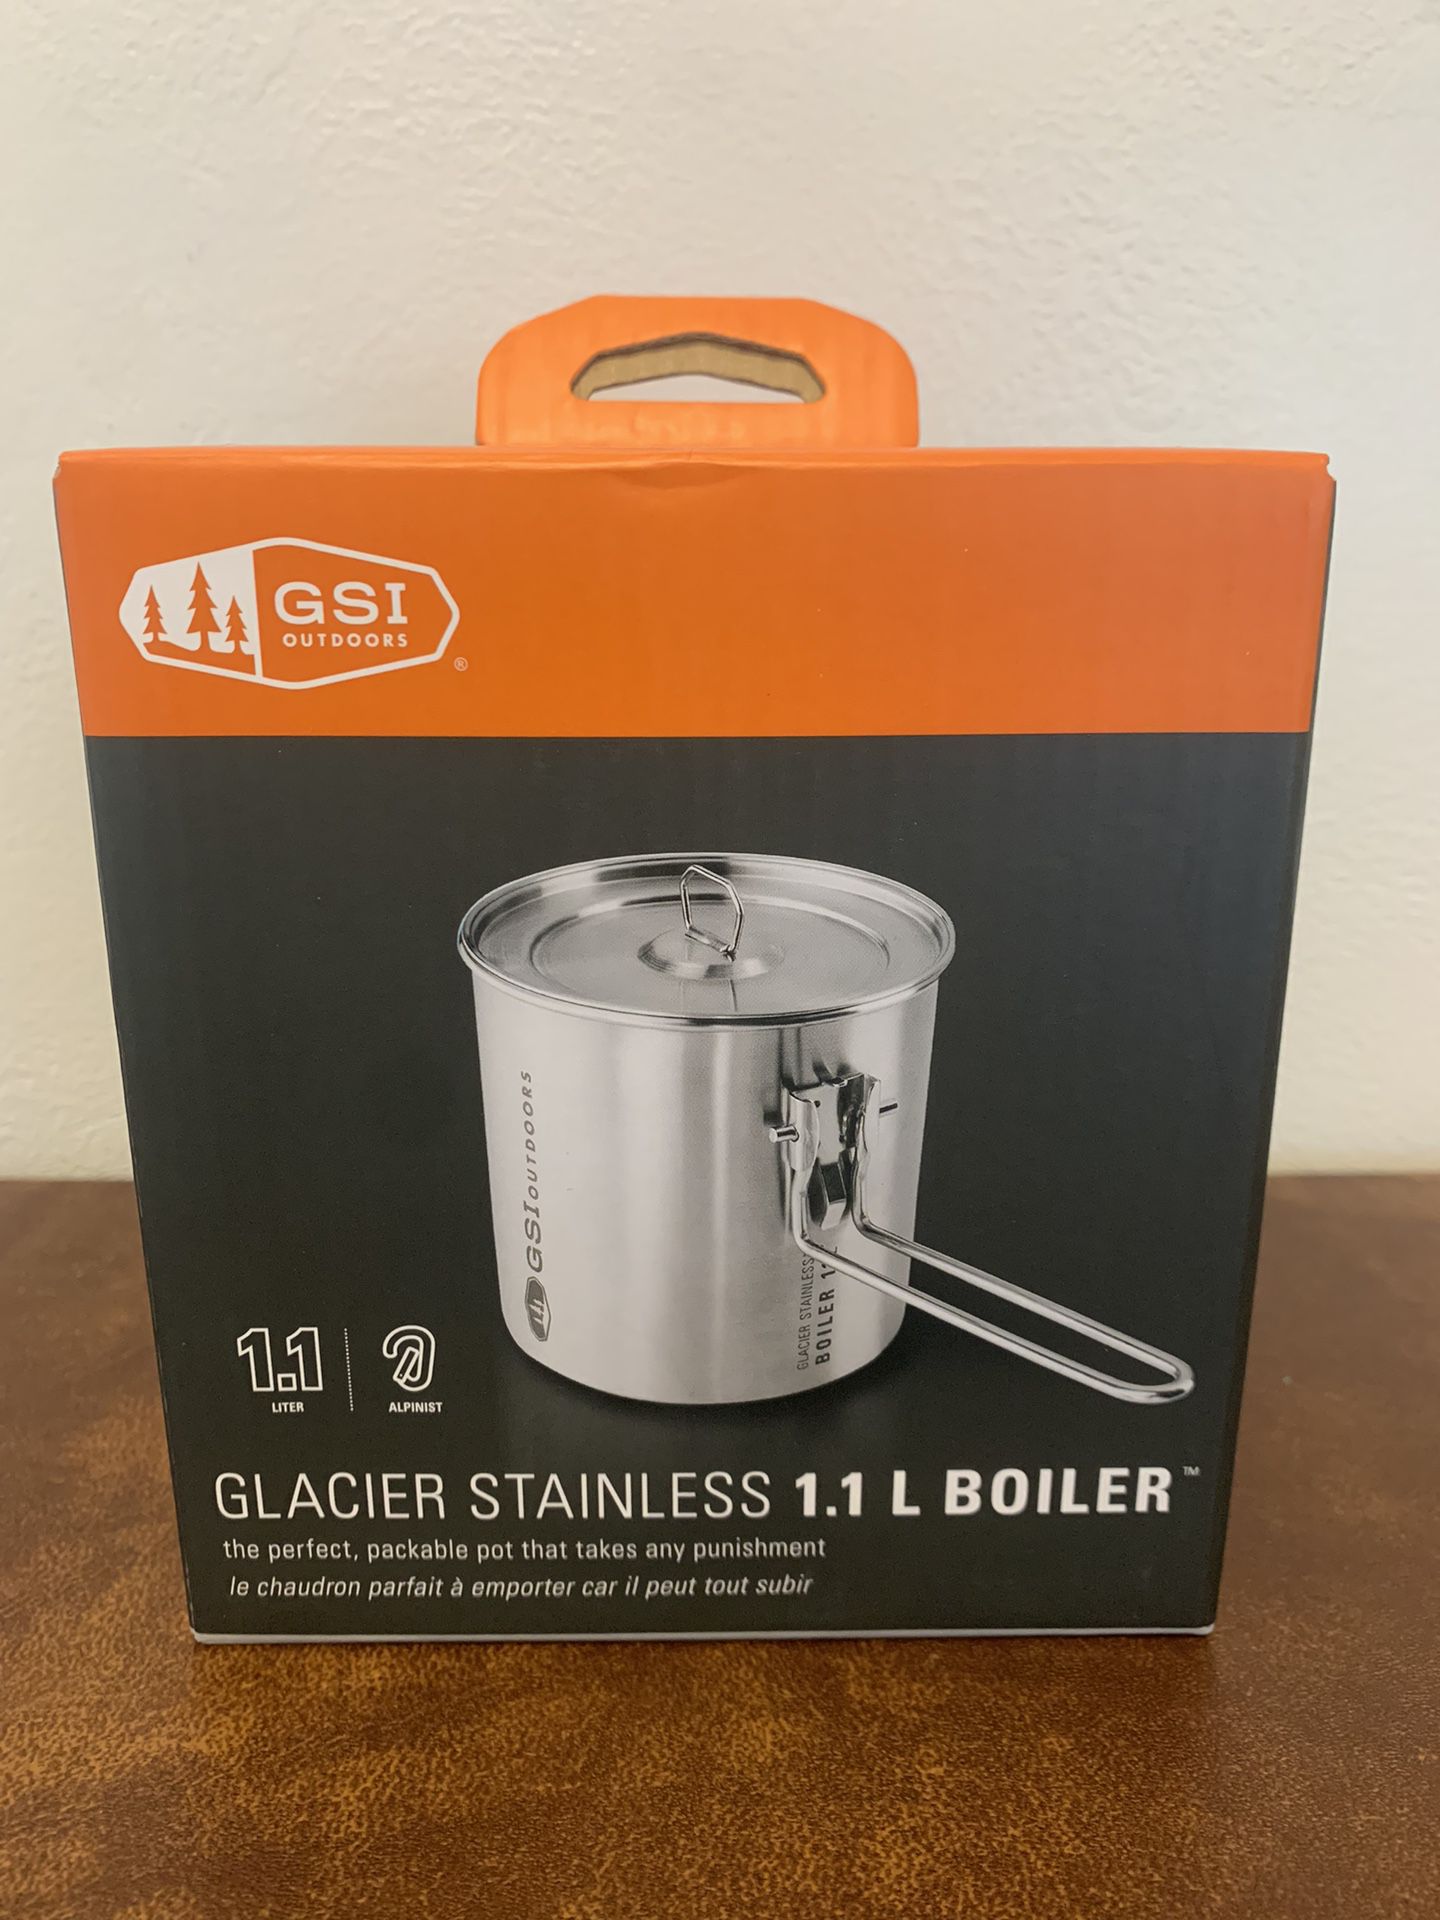 GSI Glacier Stainless 1.1L Boiler/ Backpacking/ Ultralight/ Pot/ Hiking/ Camping/ Fishing/ PCT/ 